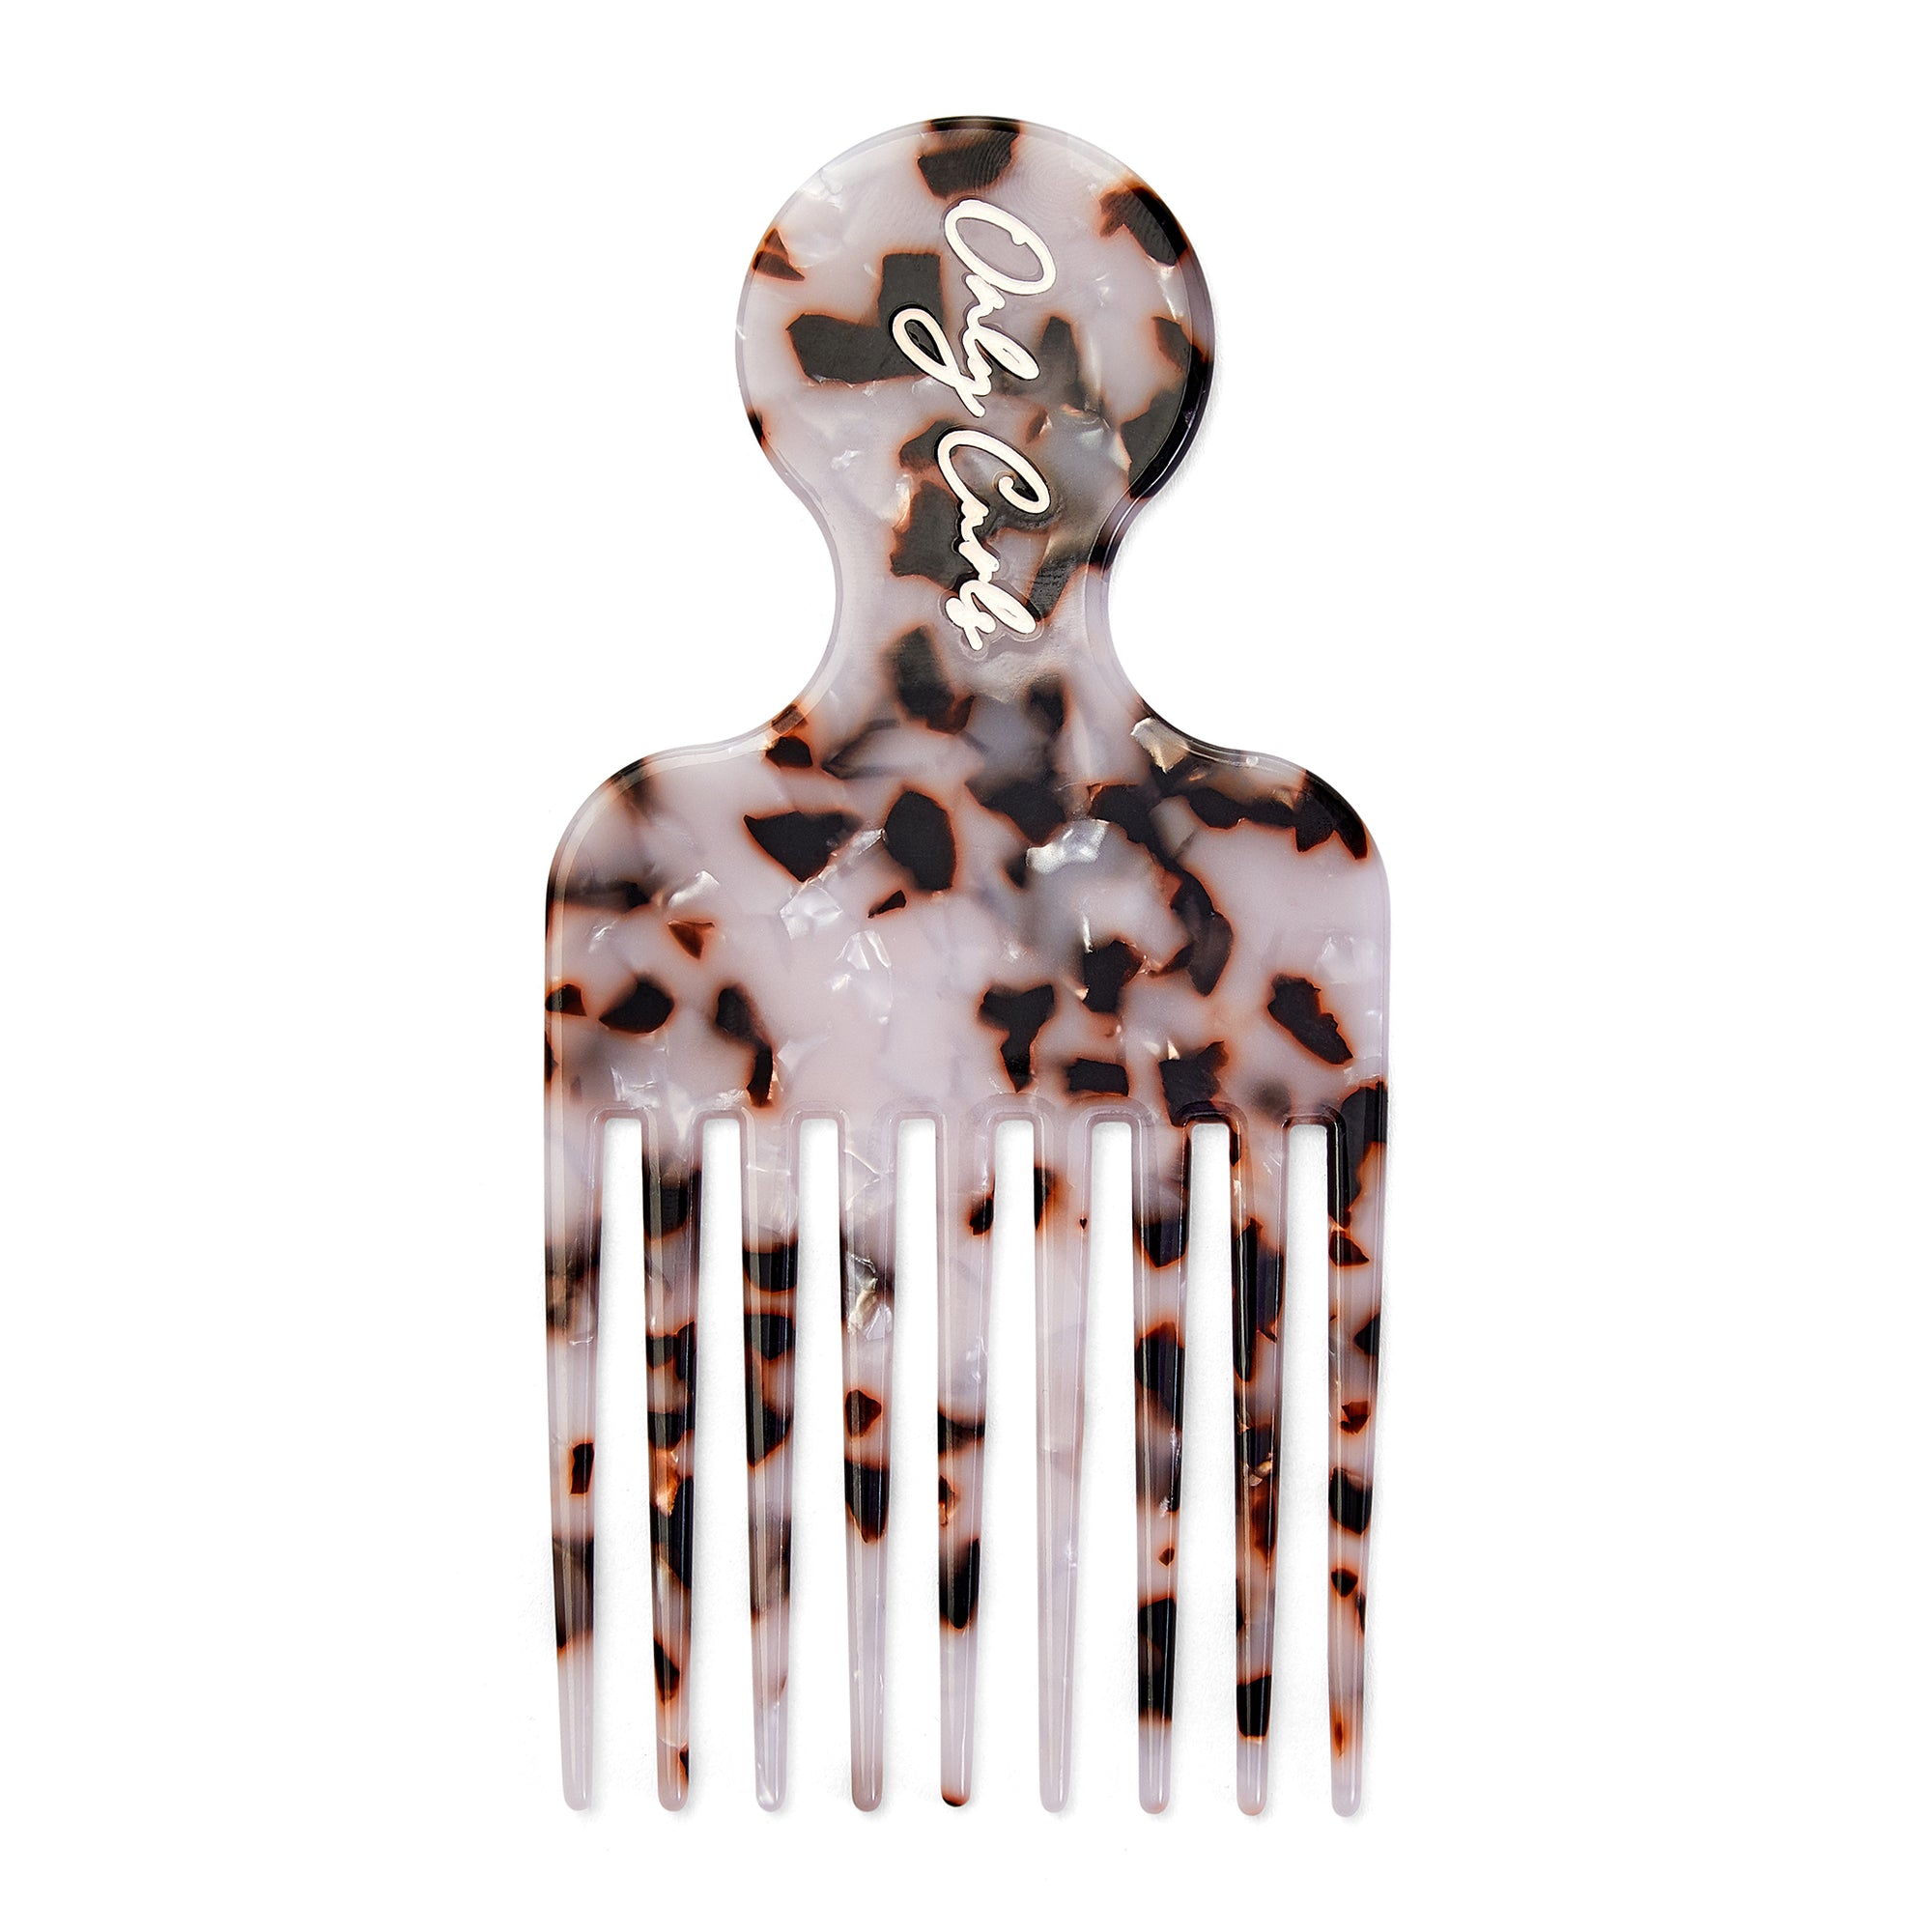 Only Curls Black Speckle Afro Comb - Only Curls